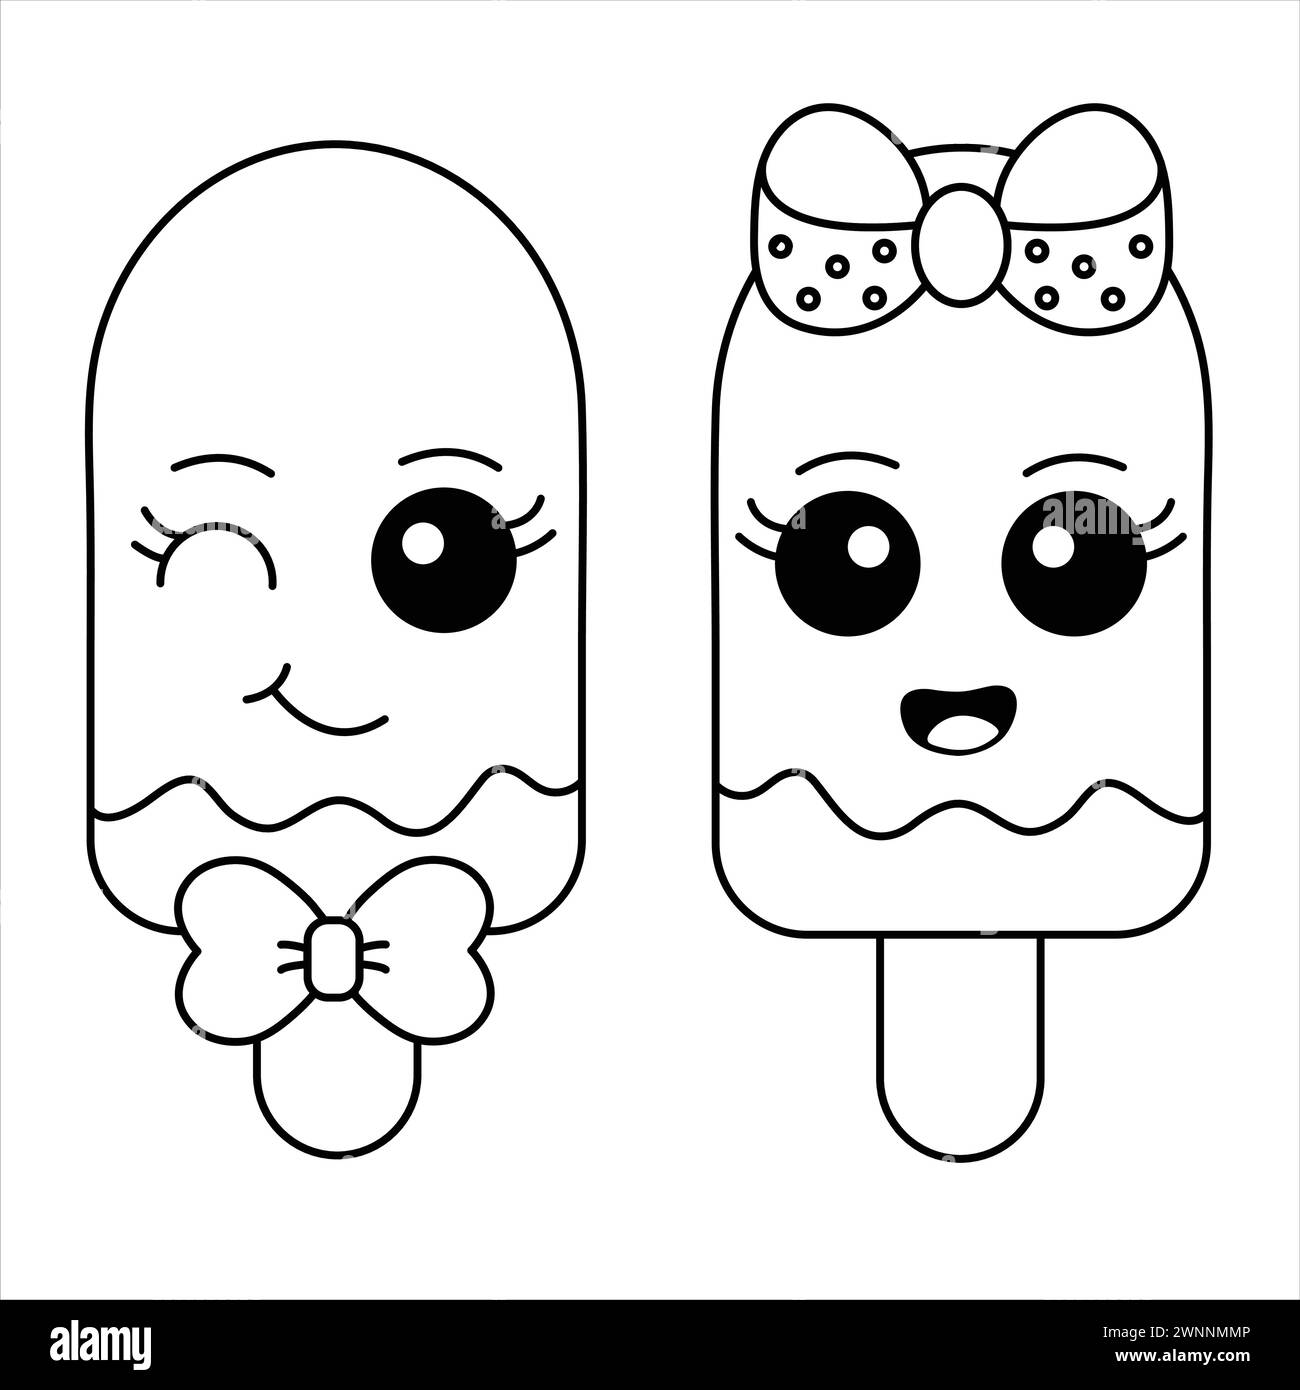 Cute Ice Cream Couple Coloring Page. Kawaii Ice Cream With Smiling Face Illustration. Cartoon Popsicle Stock Vector